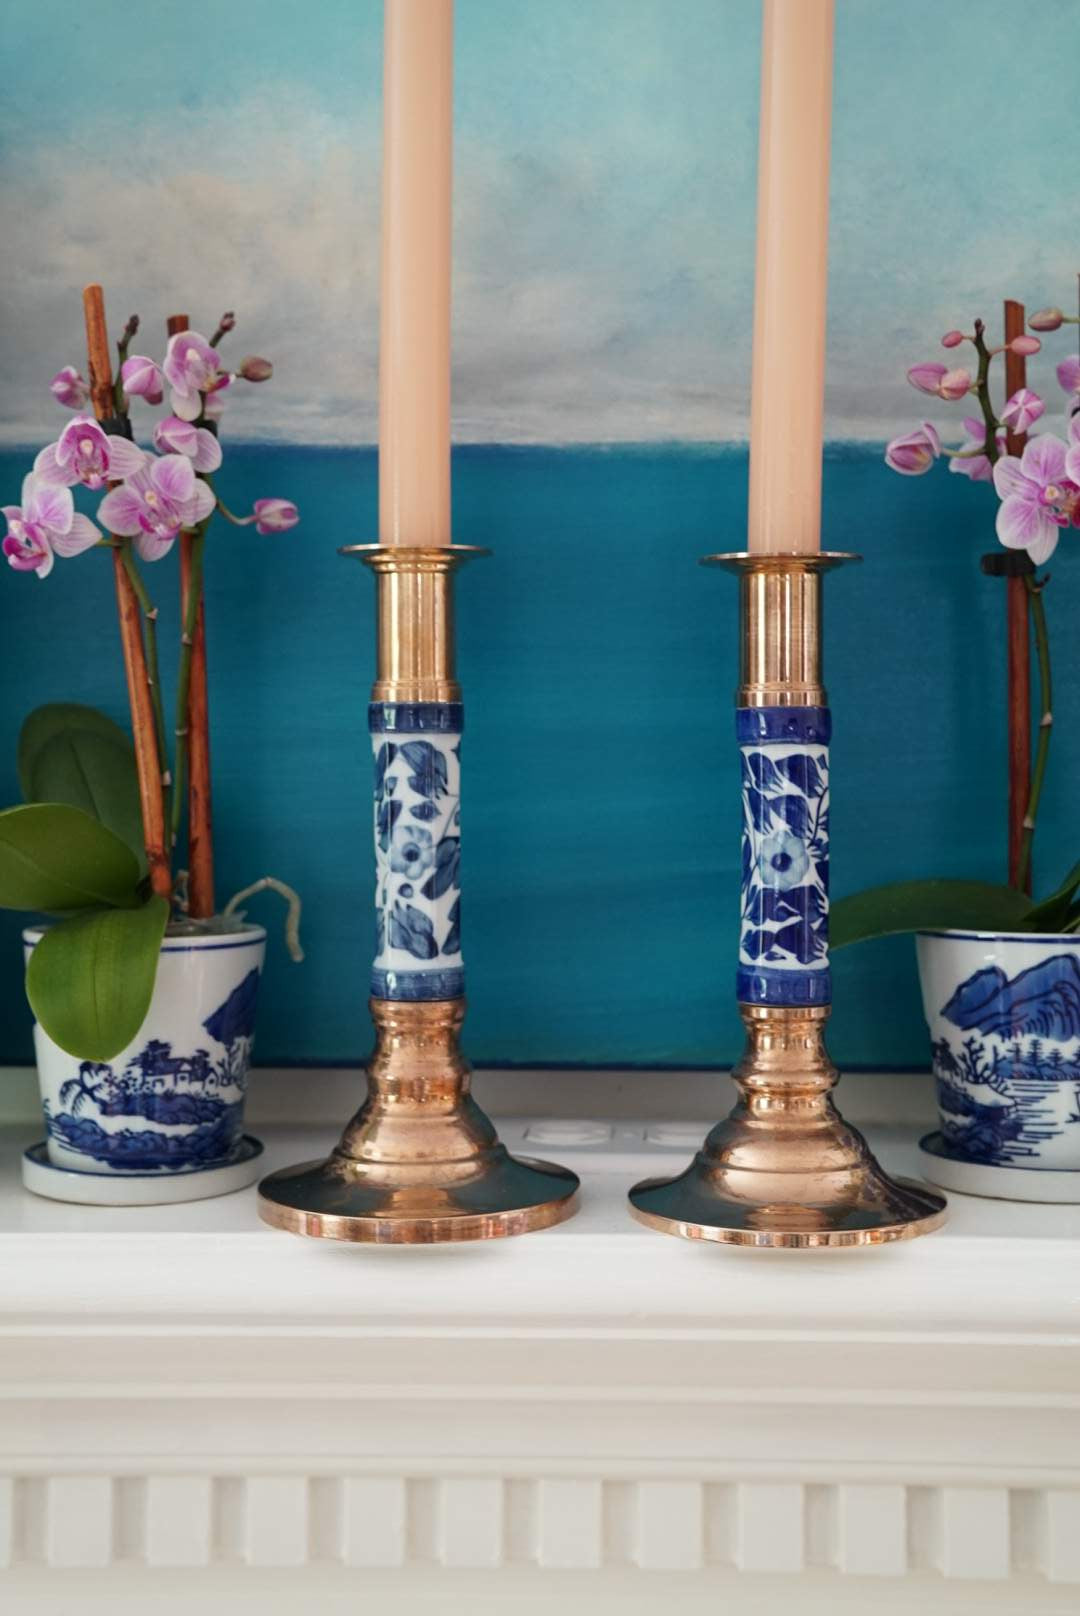 Antique Victorian Brass and Porcelain Candlesticks – With A Past